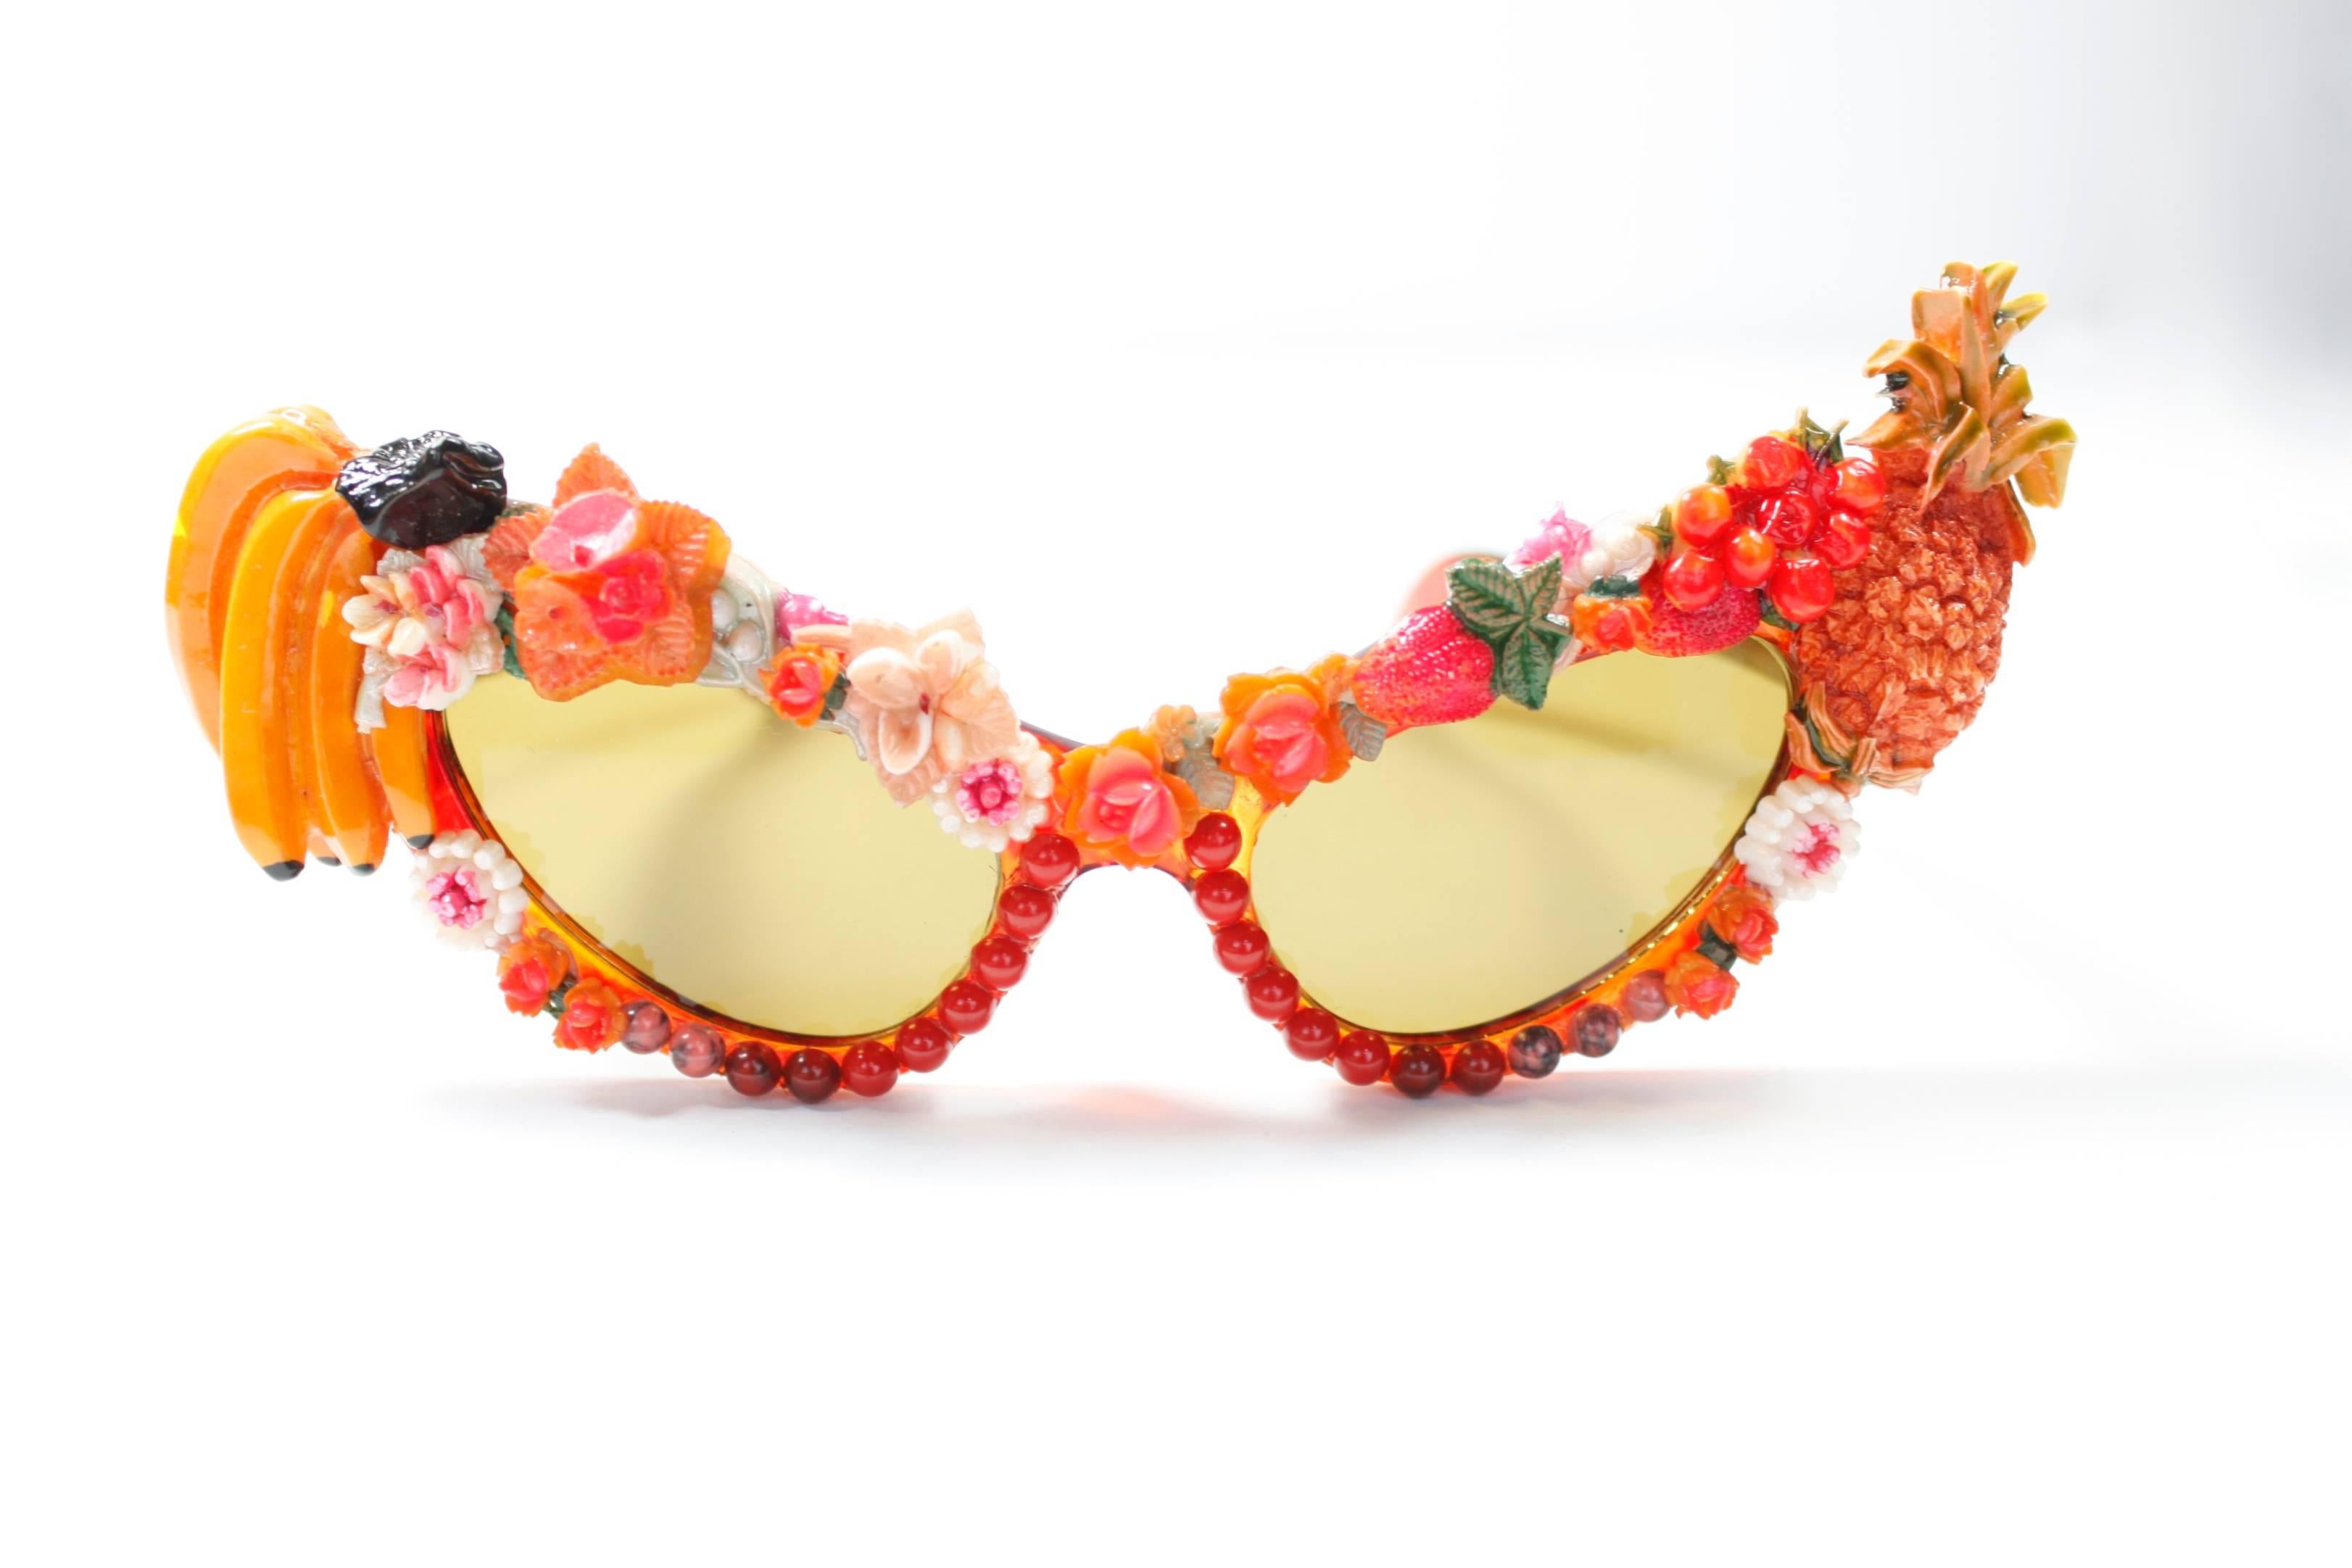 A knock-out pair of statement sunglasses from Mercura Fine Art, featuring an exaggerated cat-eye shape embellished with dimensional, colorful fruit and flowers. The frames are faux-tortoise, and the lens color is a smokey amber. A bright-lit photo